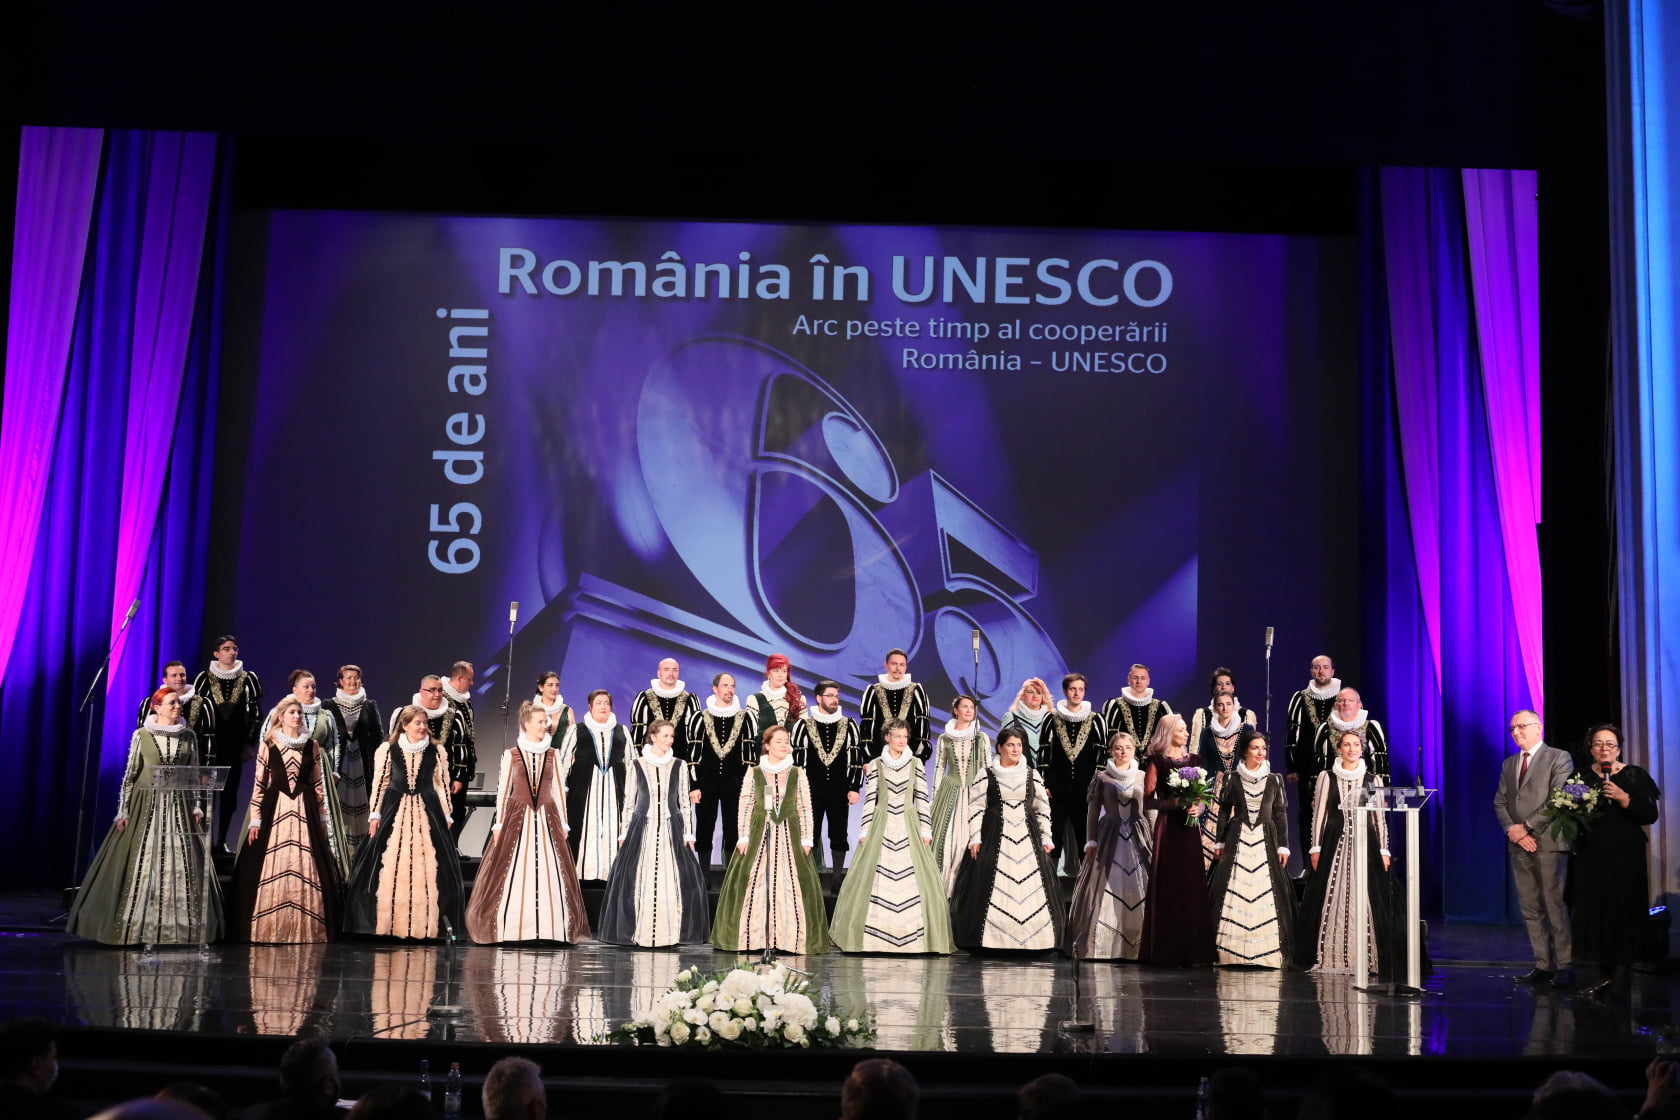 The National Commission of Romania for UNESCO Gala in the Centenary Year